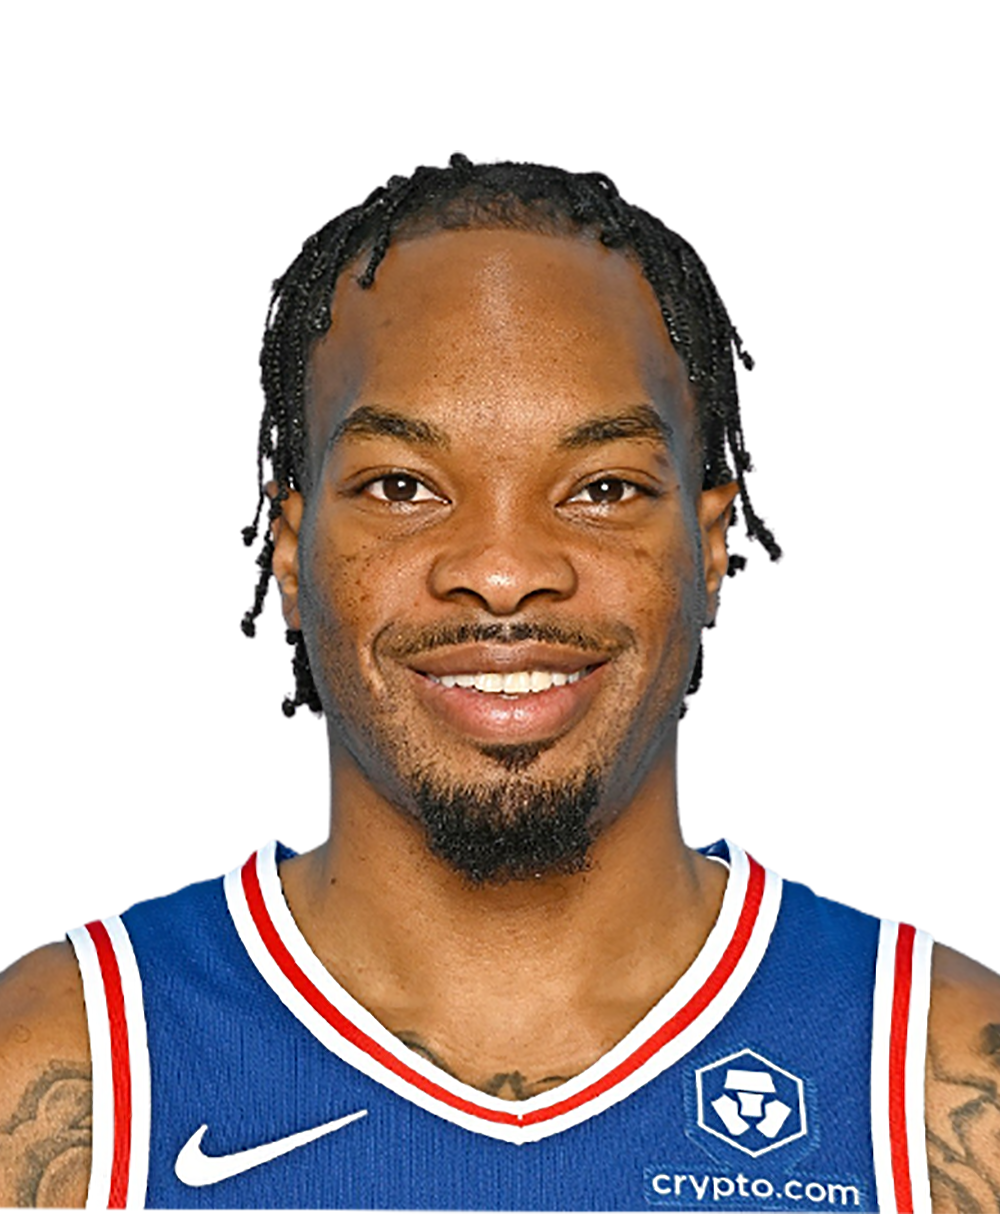 Philadelphia 76ers Sign Javonte Smart To Two-Way Contract - The NBA G League